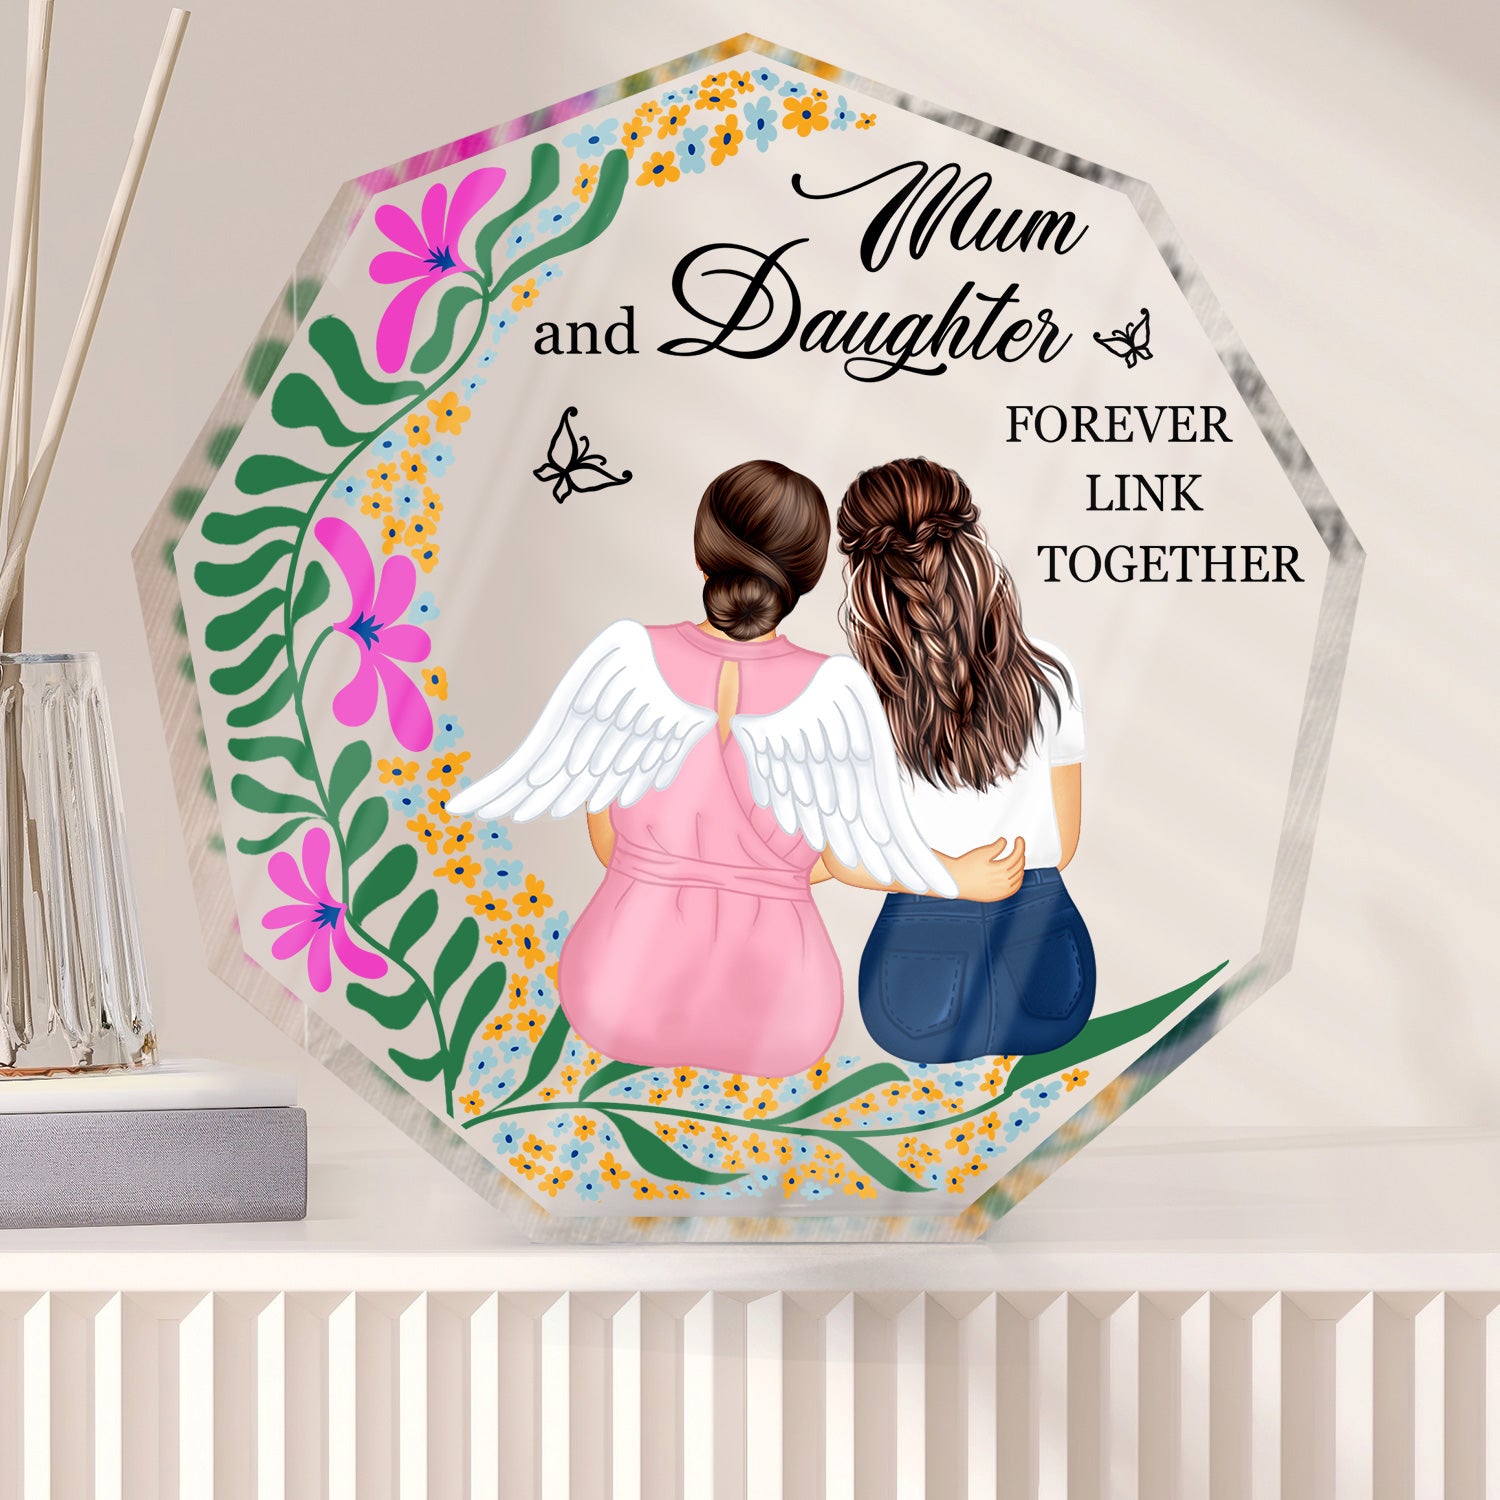 Mum & Daughter Forever Link Together - Loving Gift For Mom, Mother, Nana, Grandma - Personalized Nonagon Shaped Acrylic Plaque